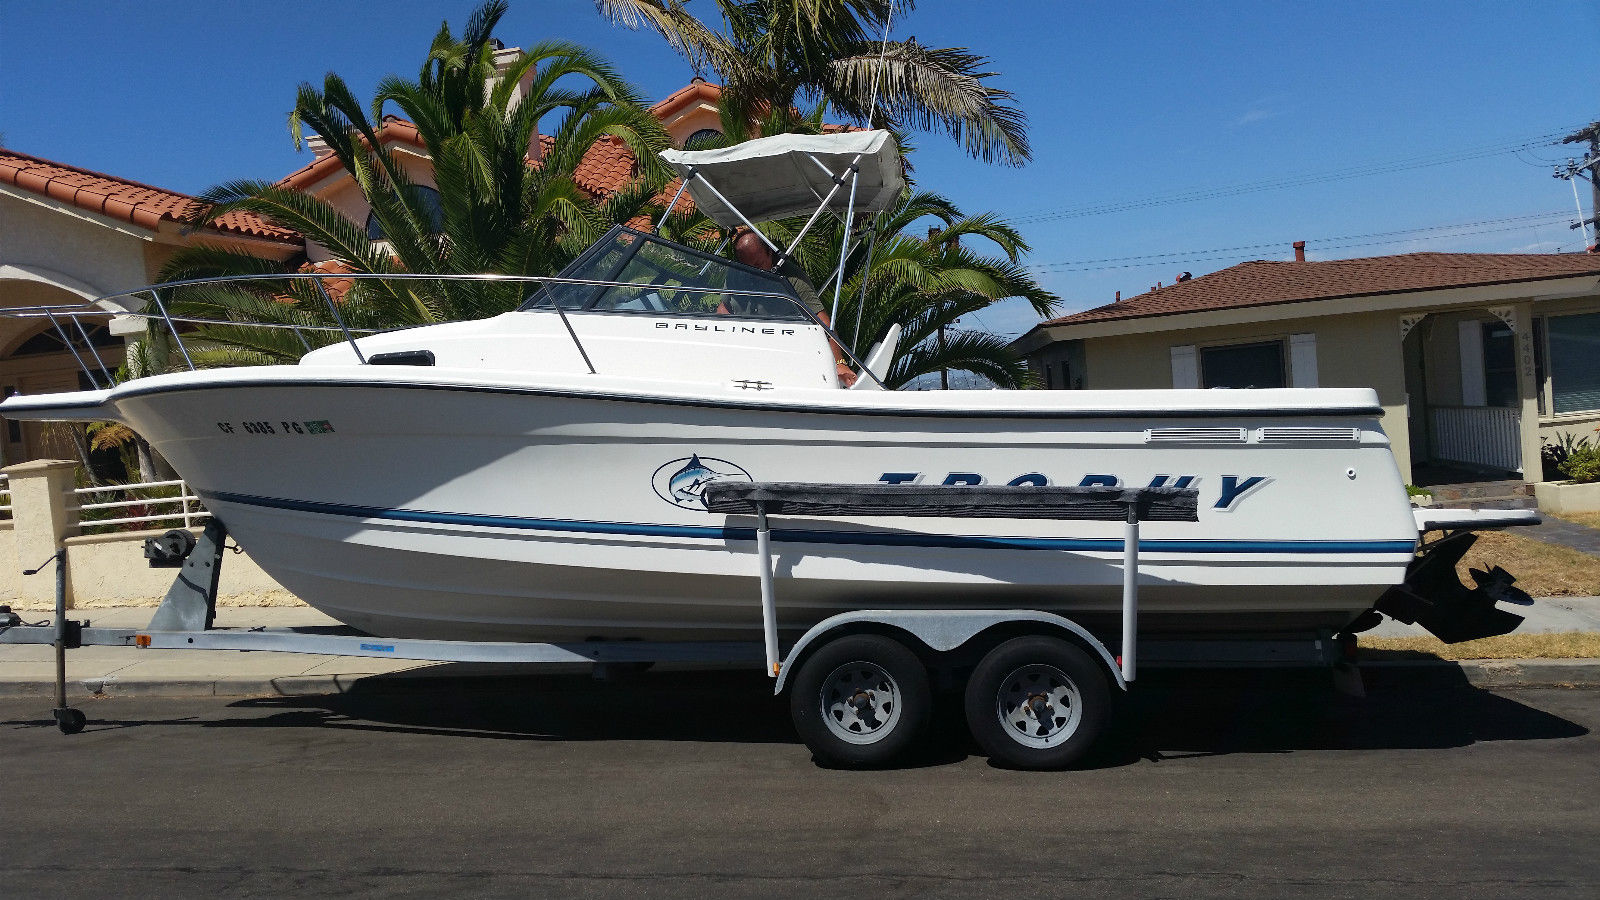 Bayliner Trophy 1998 for sale for $13,000 - Boats-from-USA.com